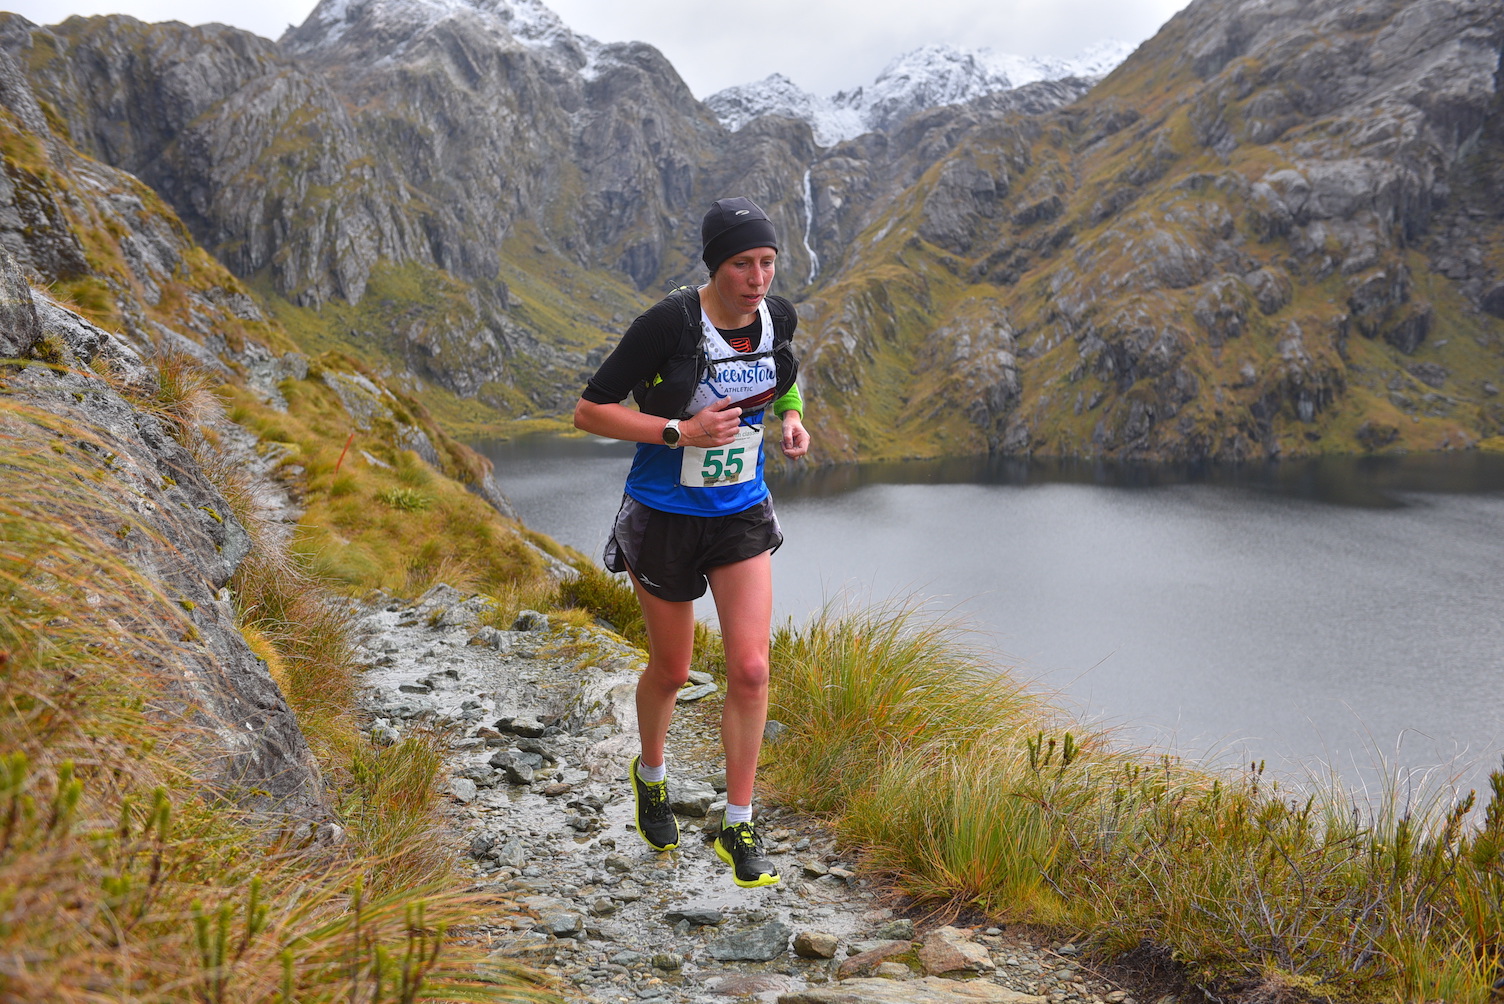 Snowfalls the ‘icing on the cake’ for Routeburn Classic Adventure Run SPR